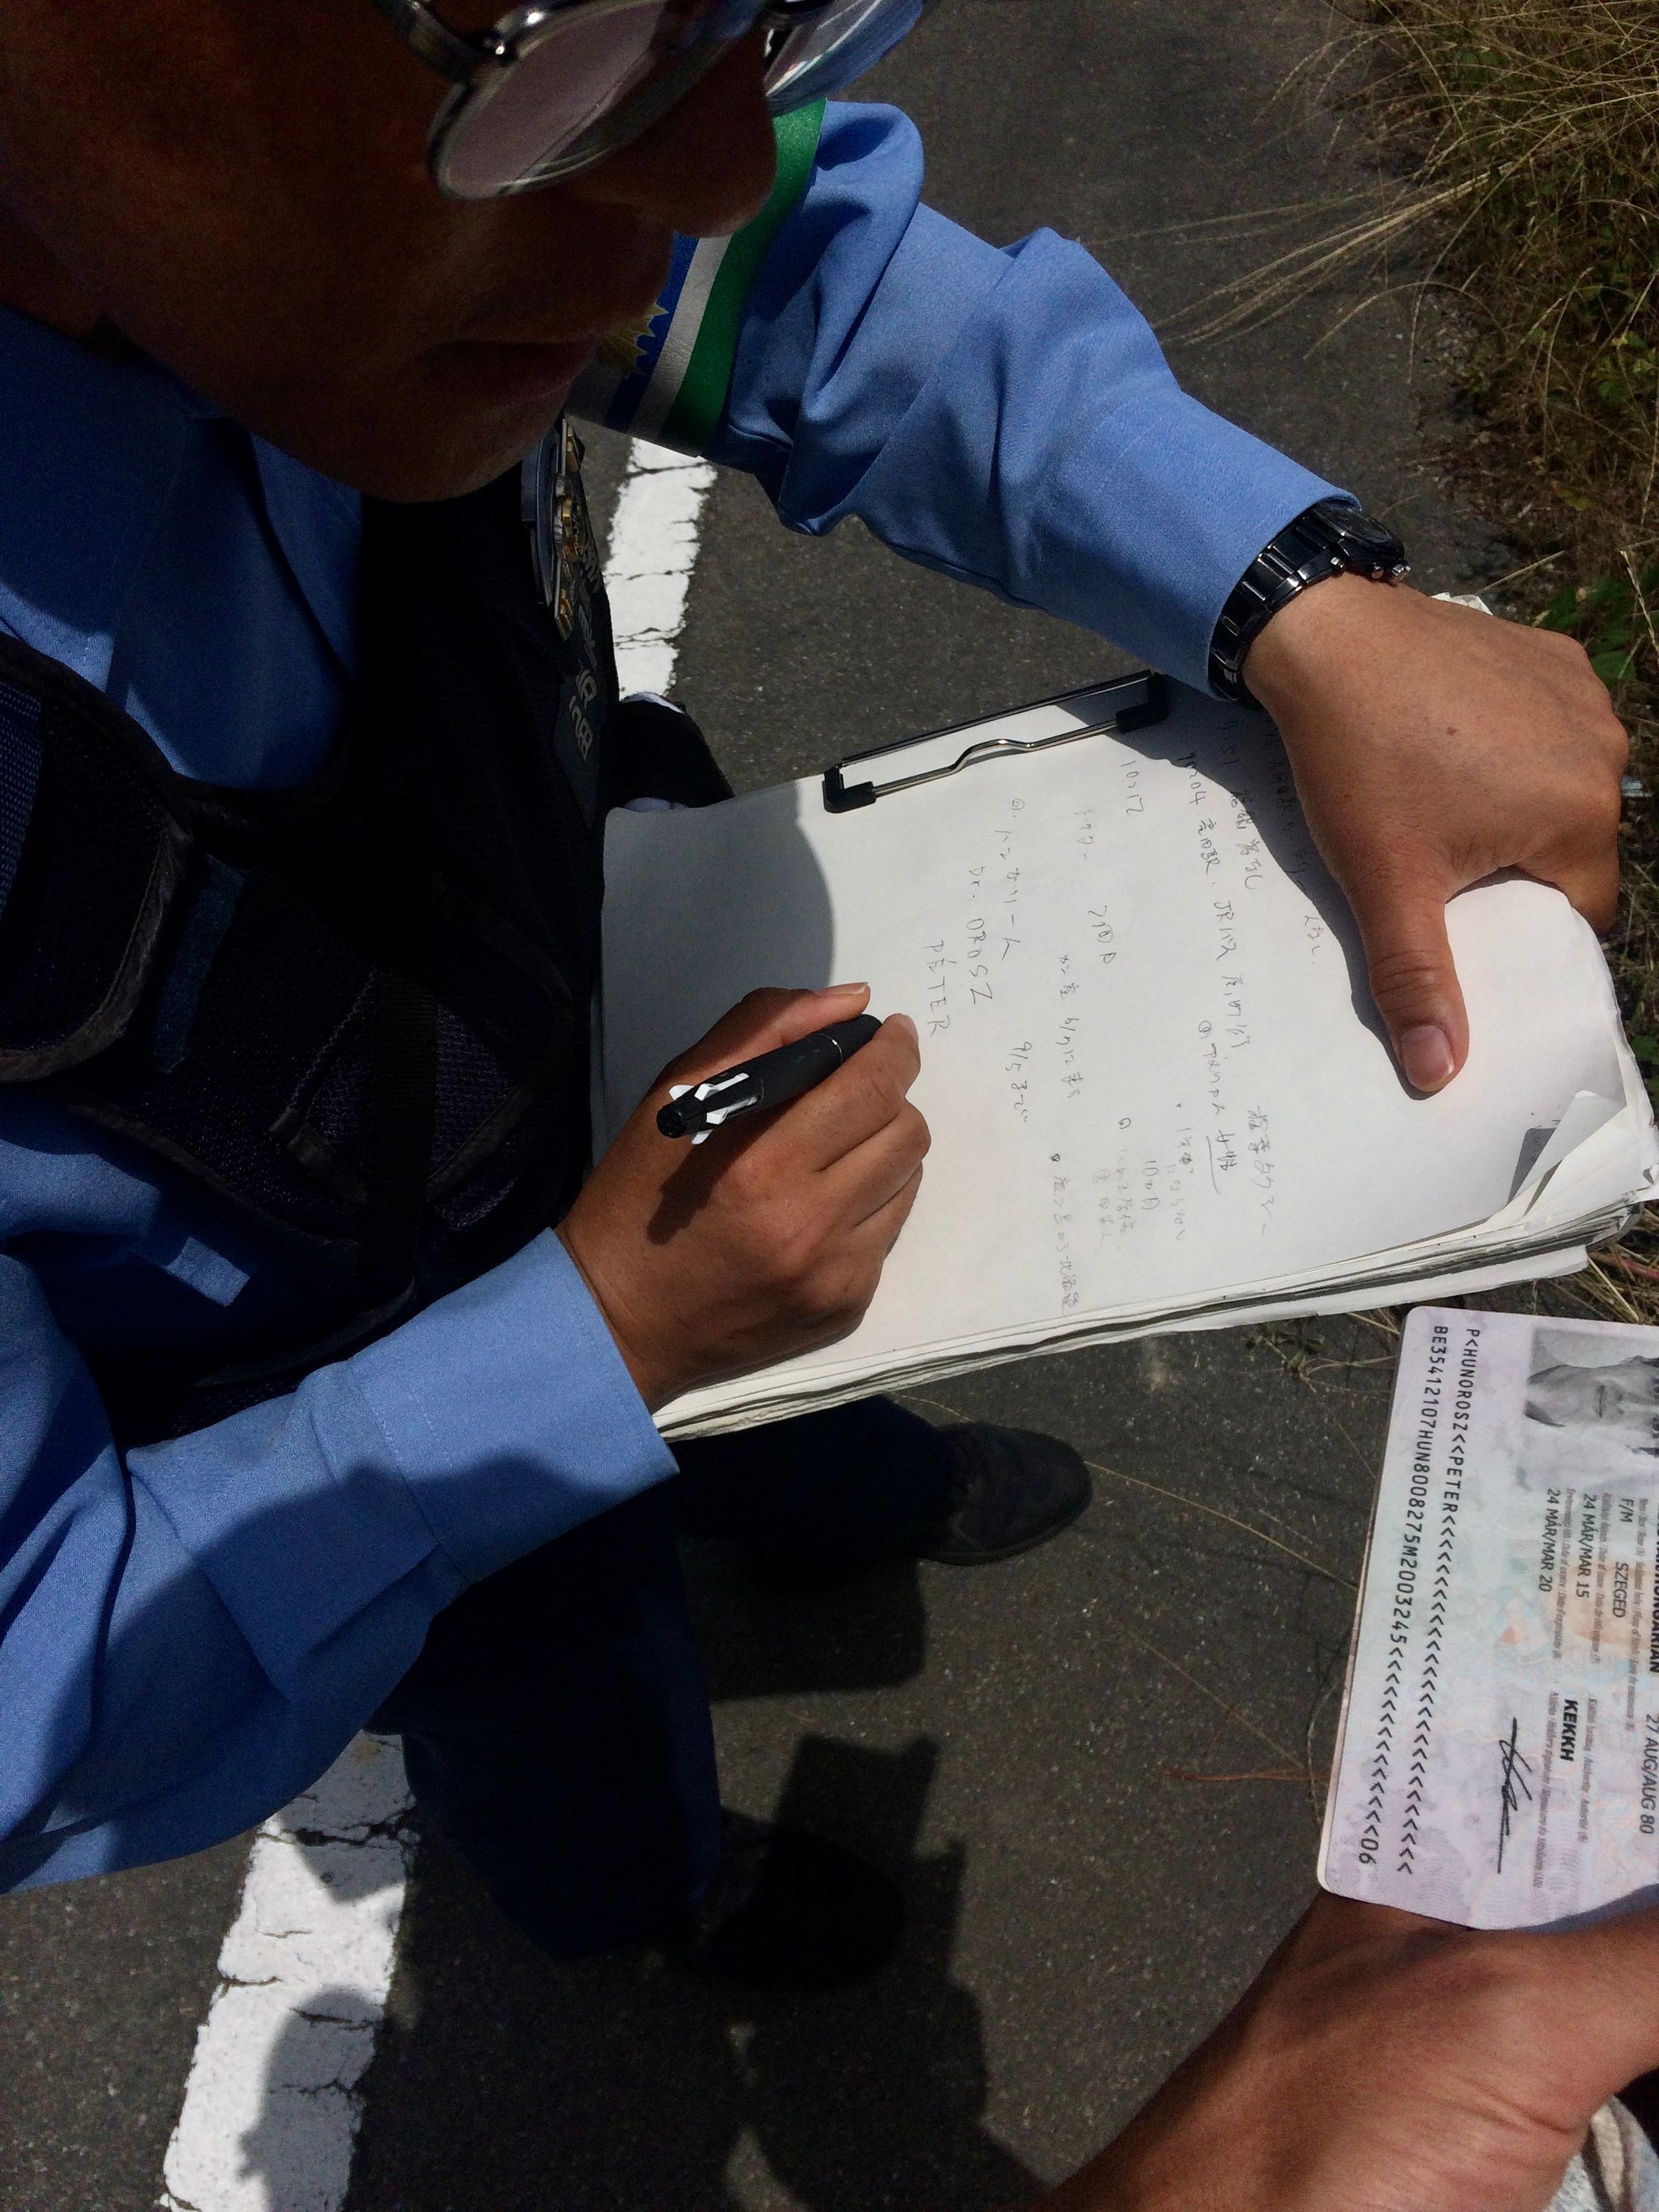 A policeman copies my passport data into his notebook.